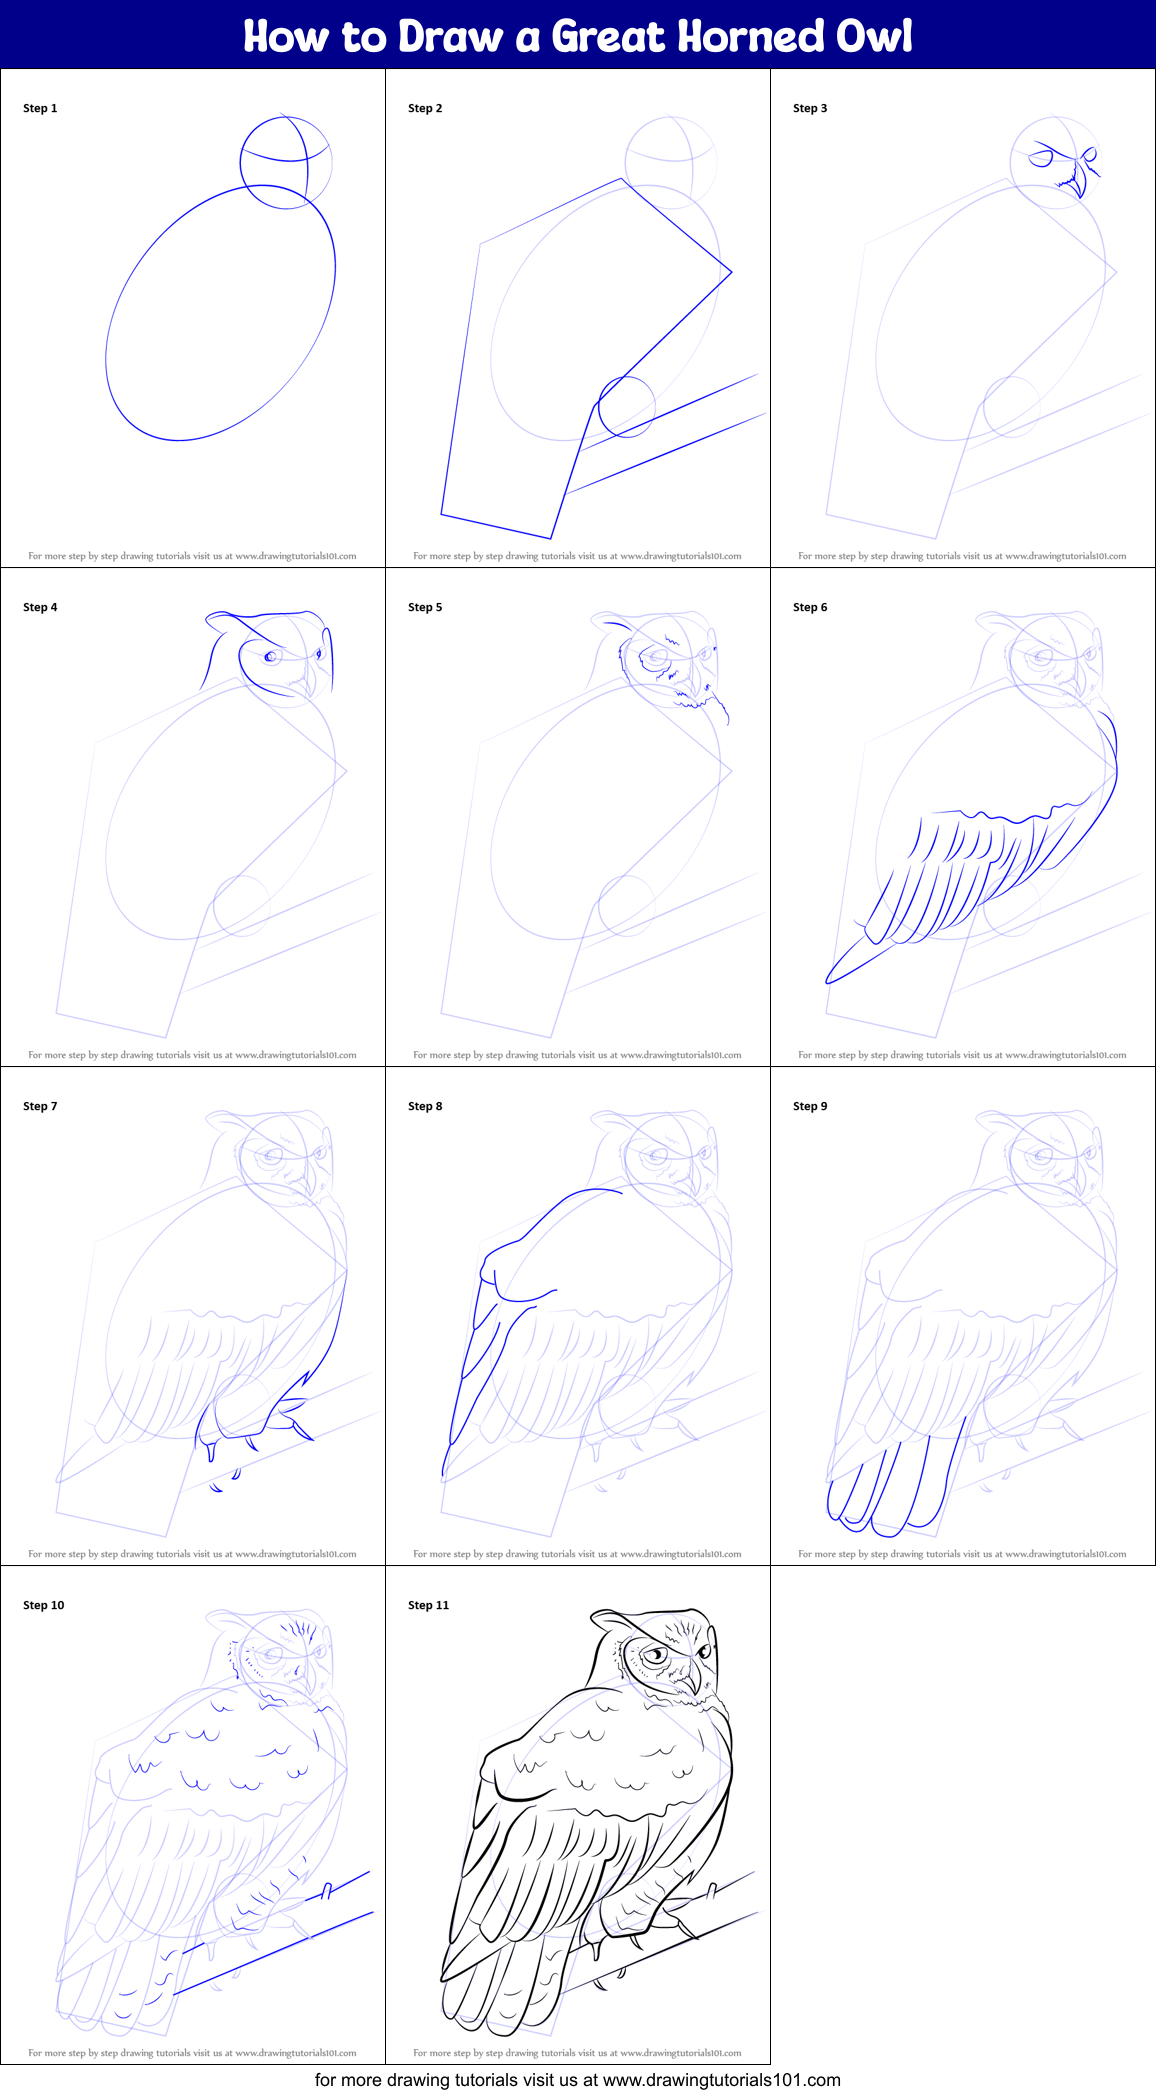 How to Draw a Great Horned Owl printable step by step drawing sheet